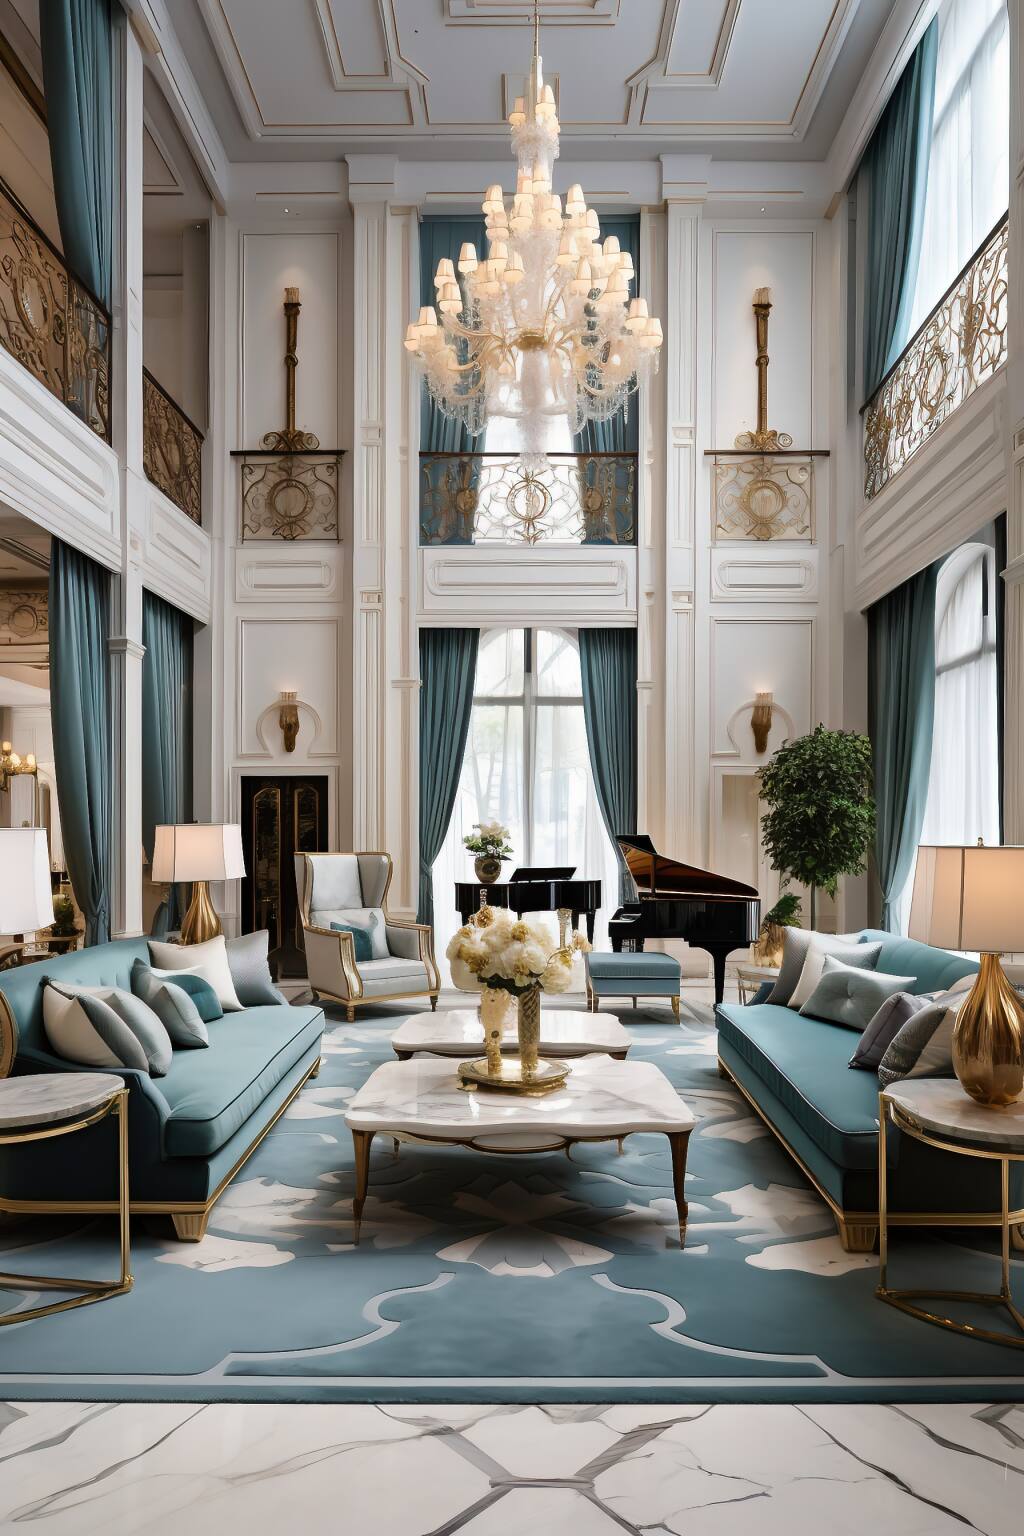 An Opulent Teal And Gold Living Room, With A Marble Floor That Adds A Touch Of Natural Elegance To The Vibrant, Luxurious Space.